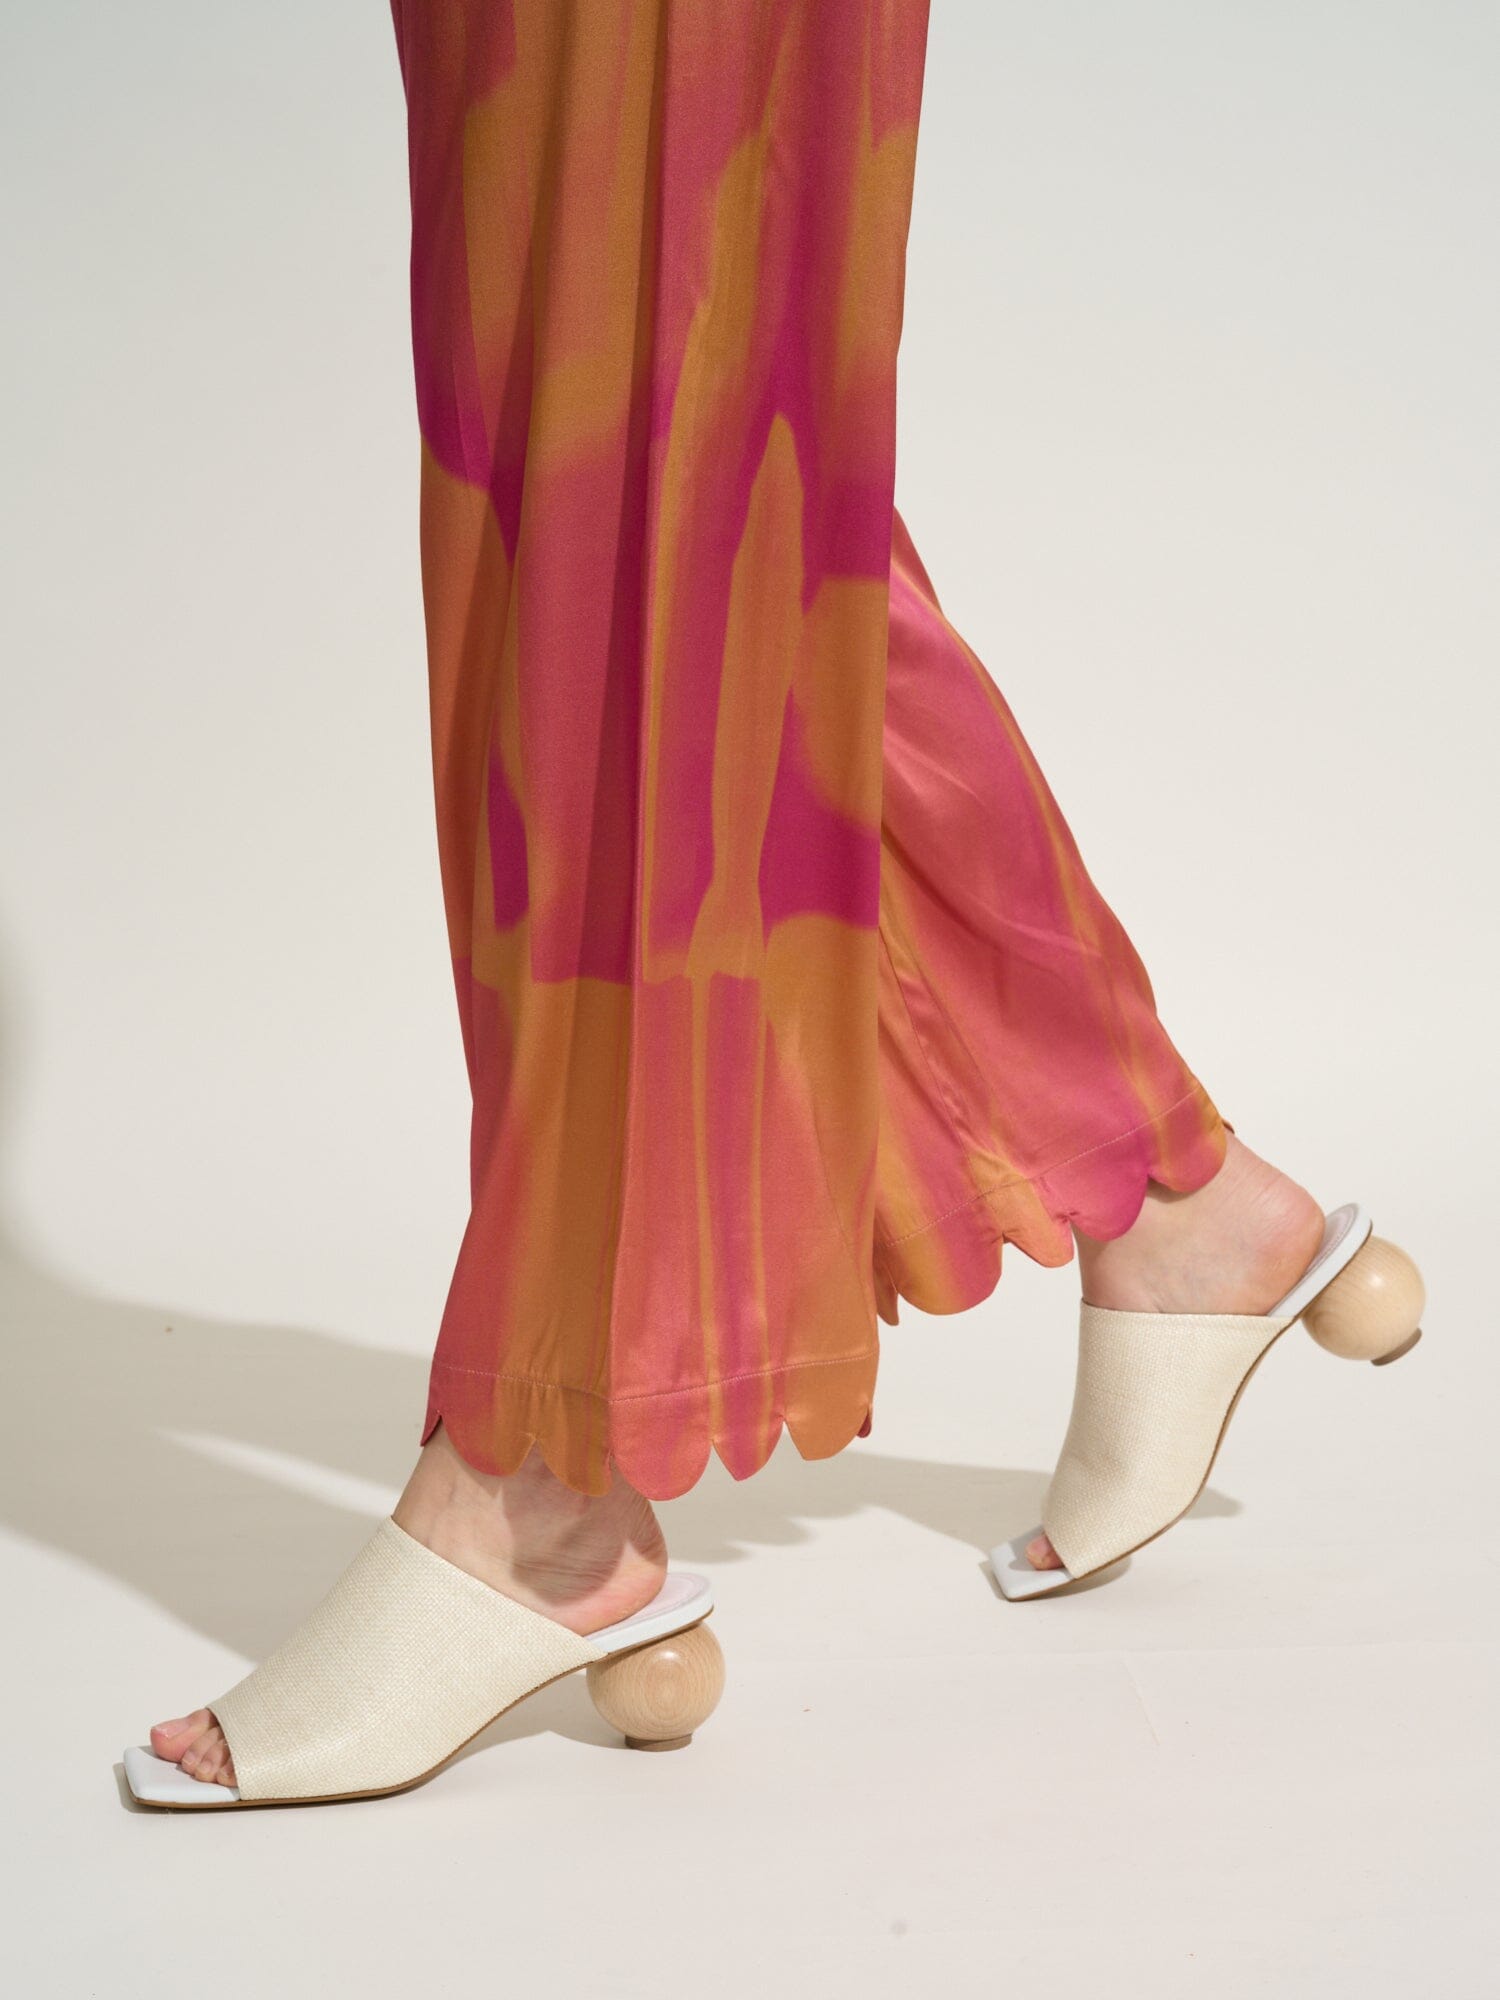 SIFNOS - Tie & Dye Fuchsia Printed Viscose Satin Wide Leg Pants with Elasticated Bottom and Petal Detail Pants Fête Impériale